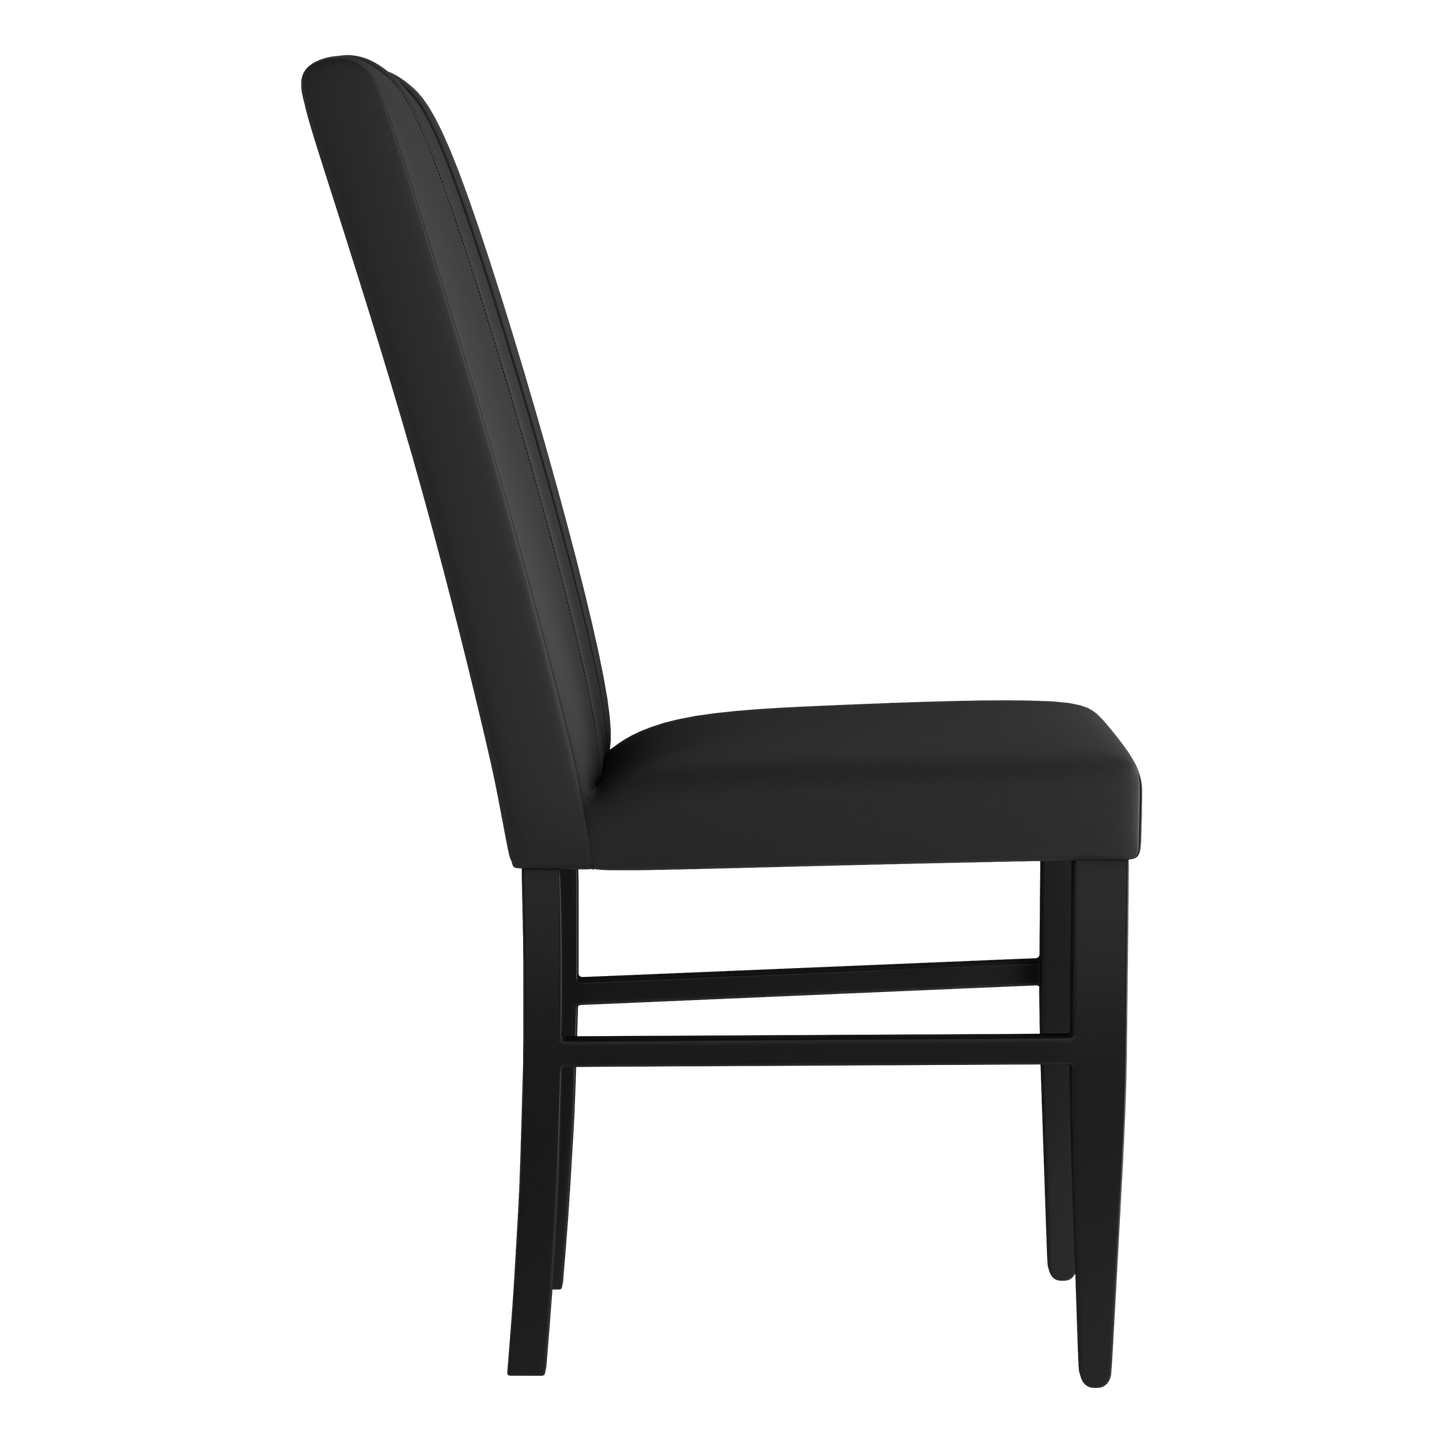 Side Chair 2000 with San Jose Earthquakes Logo Set of 2